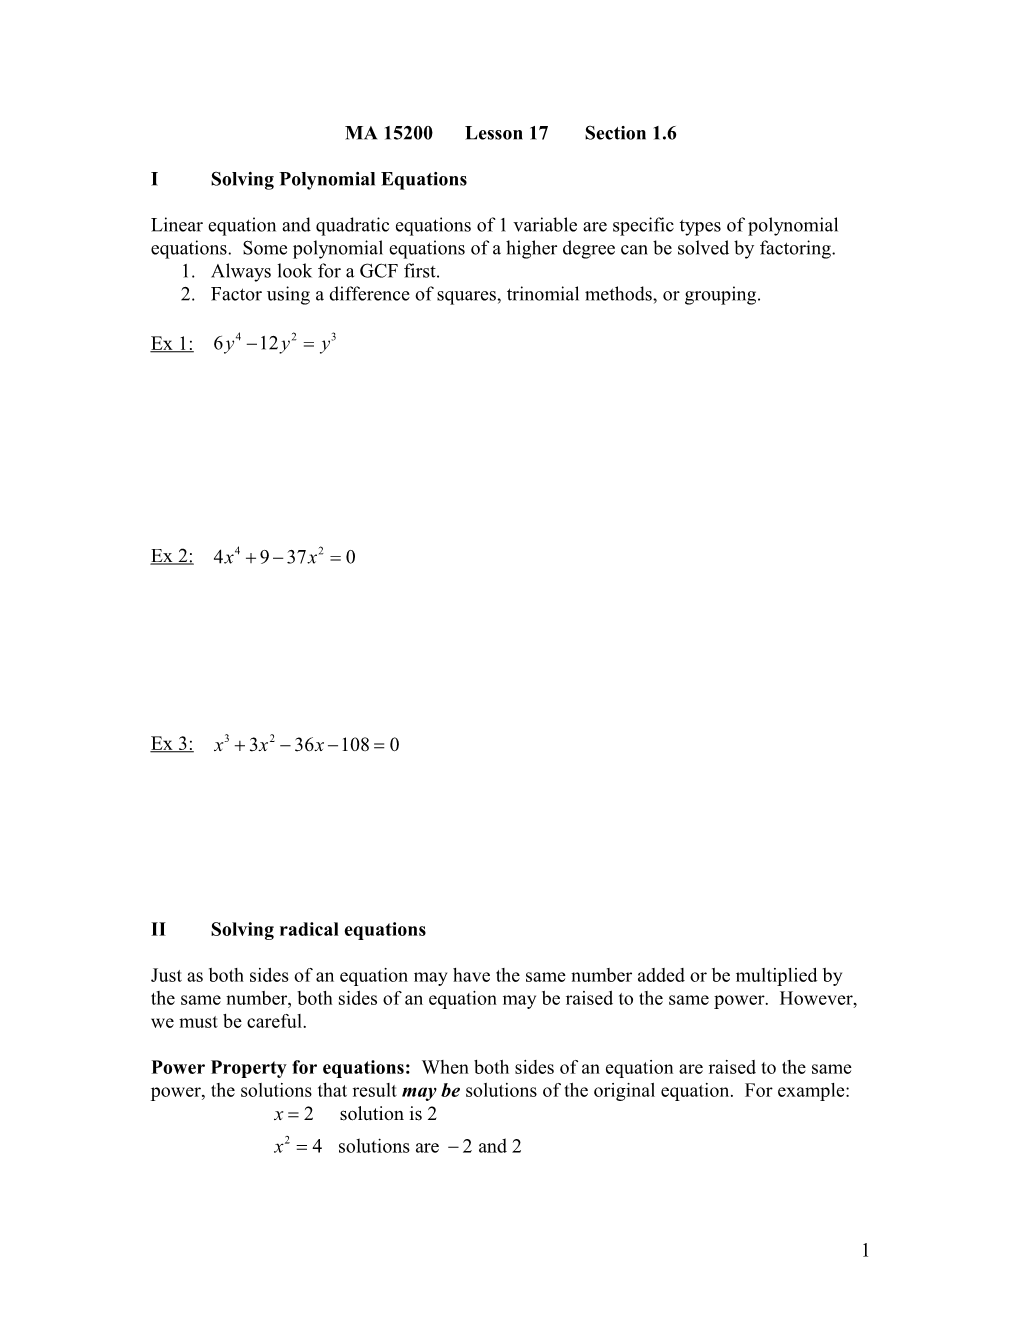 Isolving Polynomial Equations